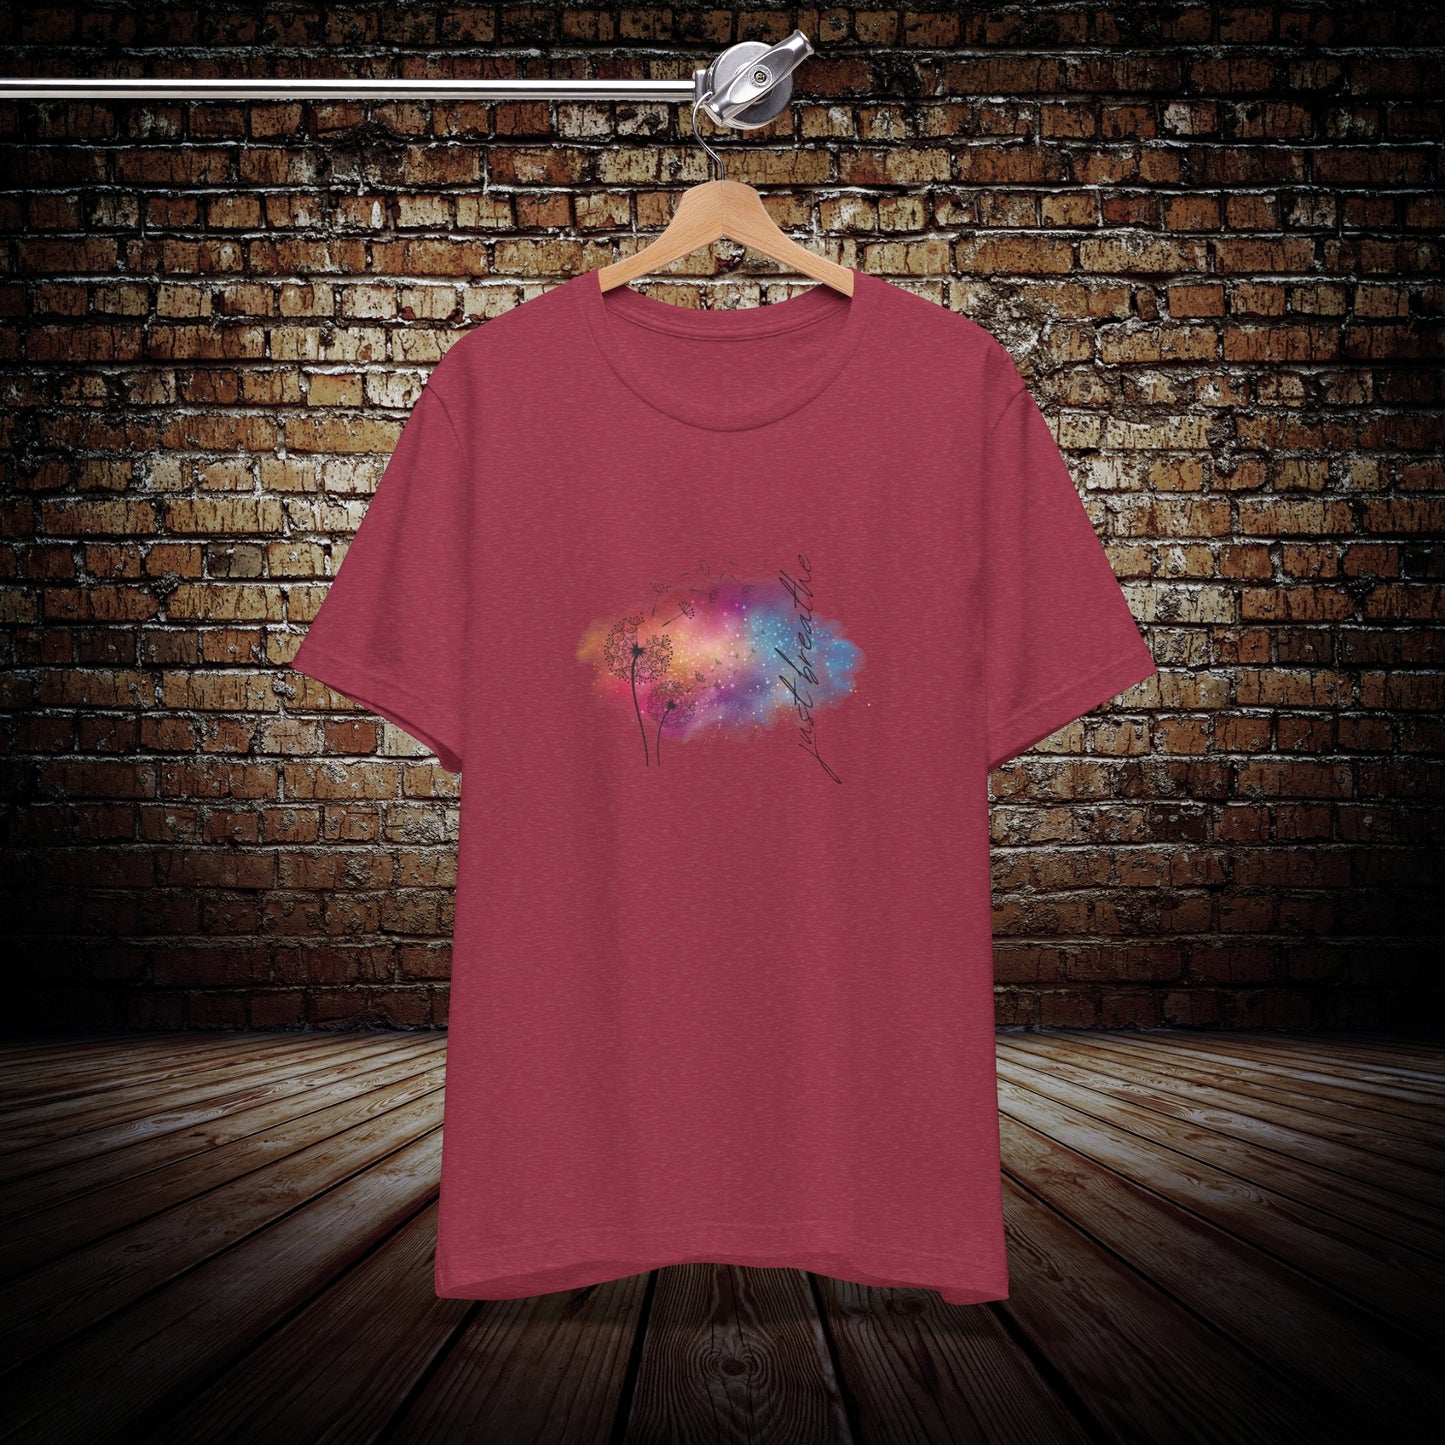 Just Breathe in color - Yoga Inspired T-Shirt